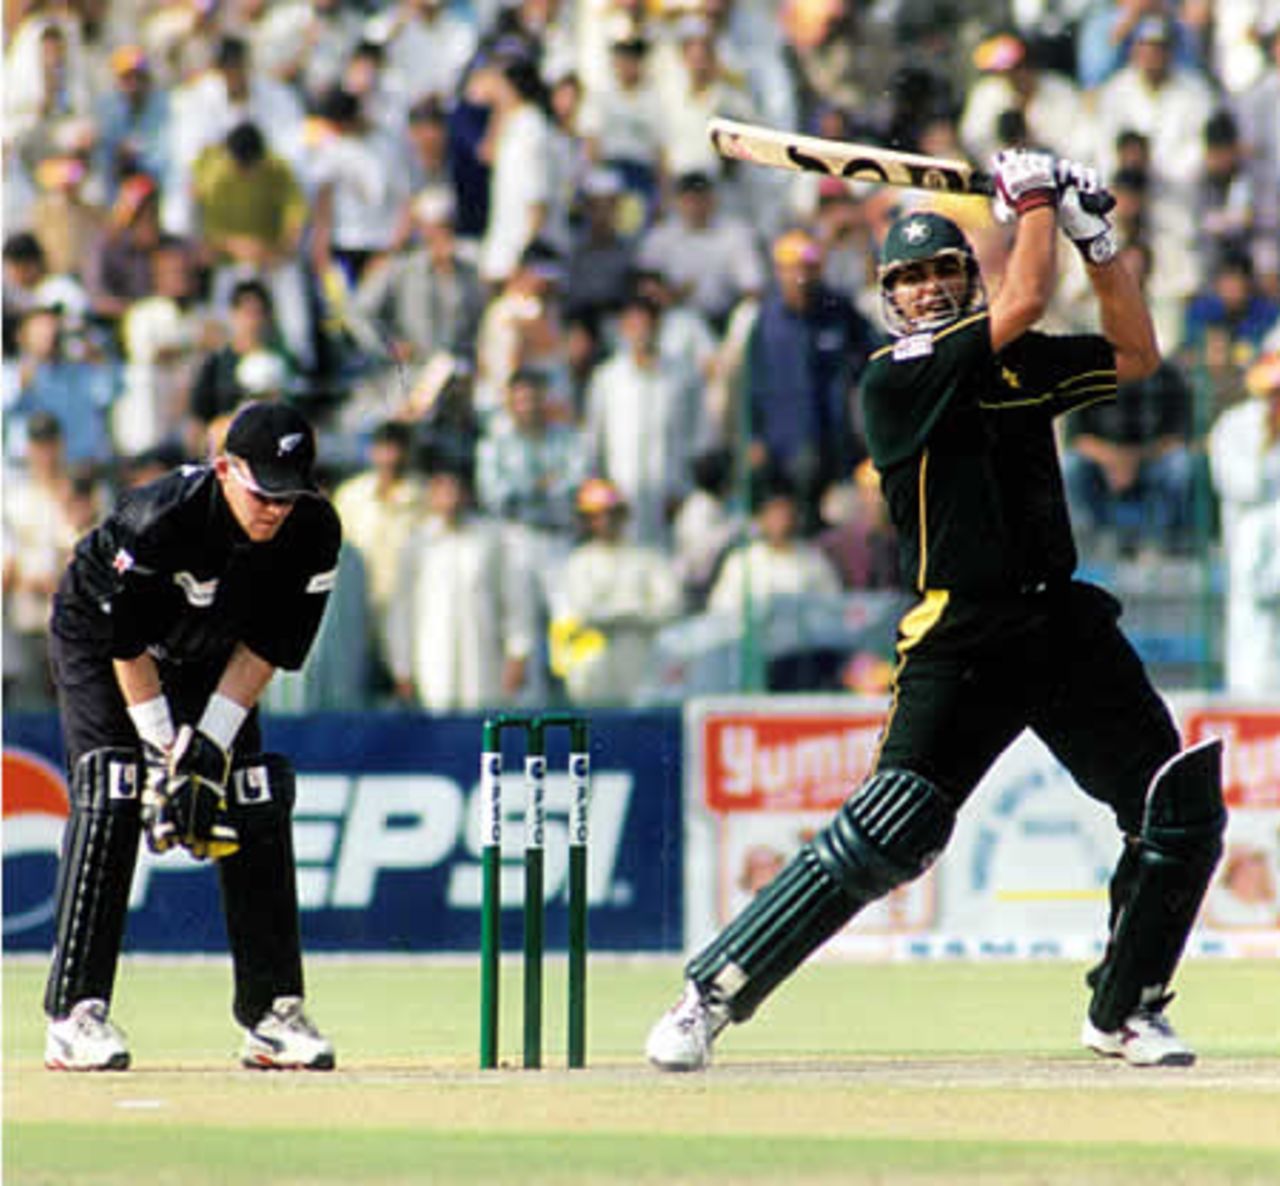 Inzamam cuts through point while Lou Vincent looks down - 3rd ODI at Lahore, New Zealand v Pakistan, 27 Apr 2002